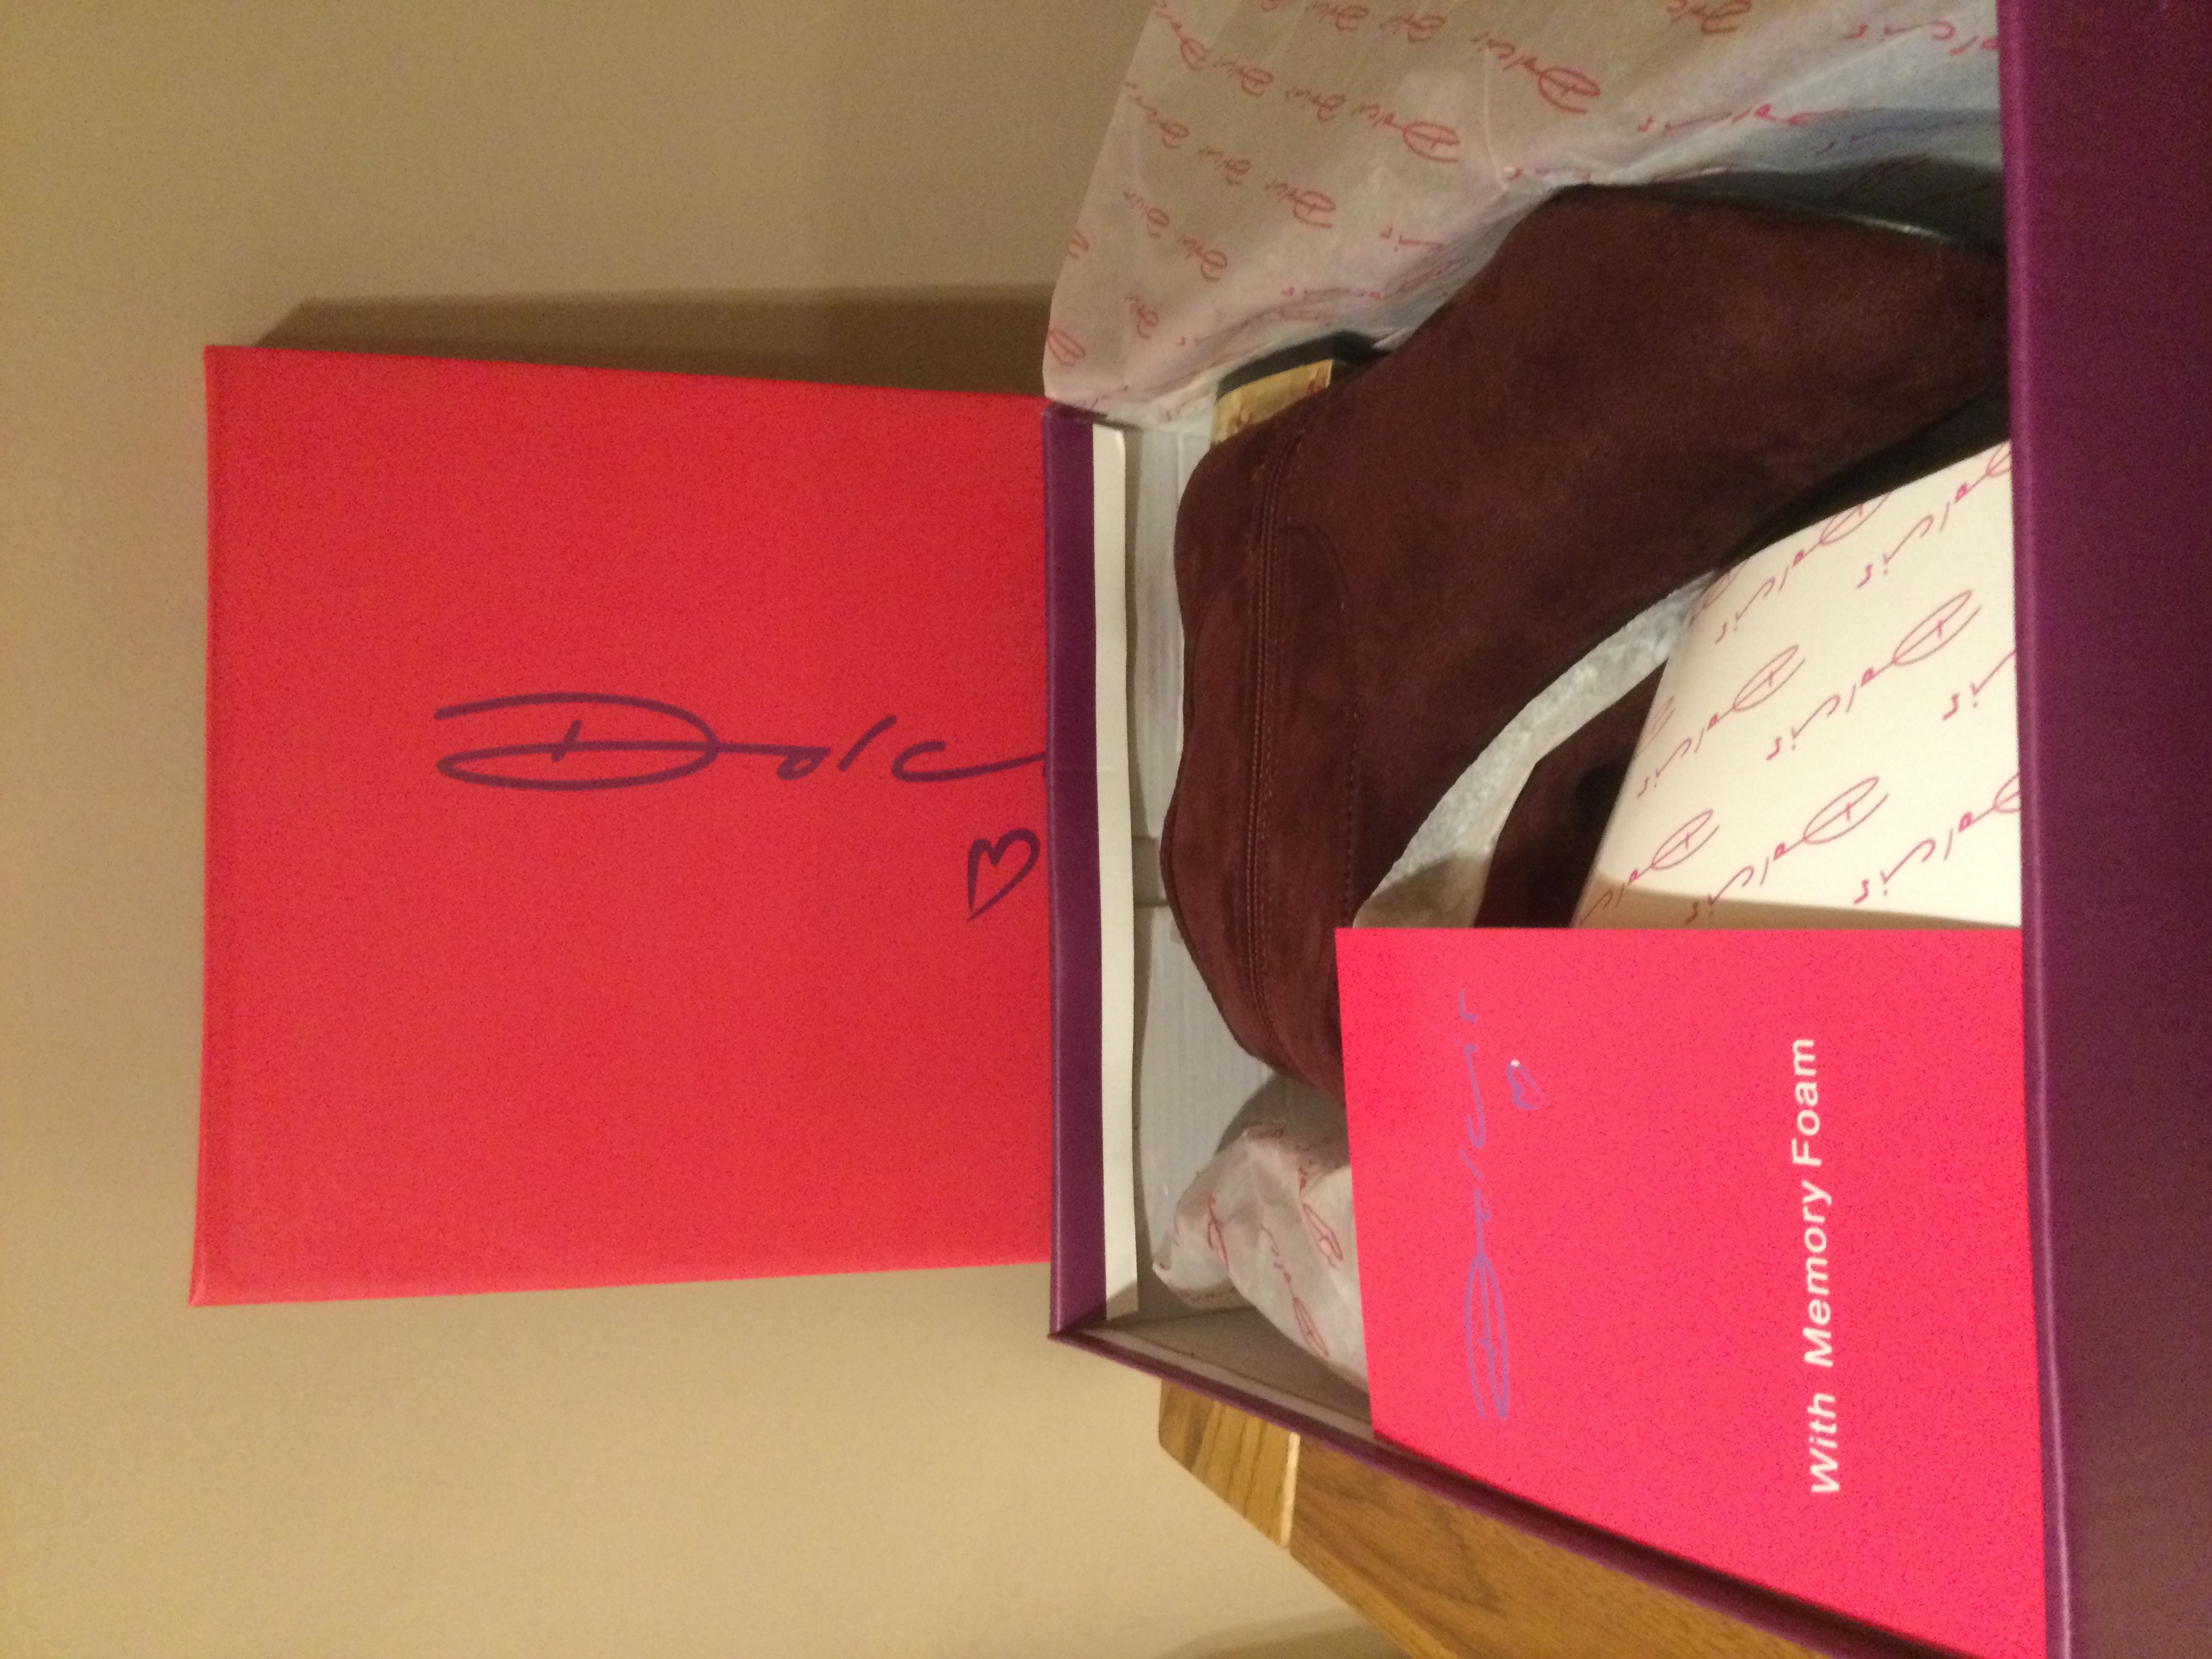 Dolcis “Katie” Long Boots, Low Heel, Size 4, Burgundy - New RRP £55.00 - Image 5 of 7